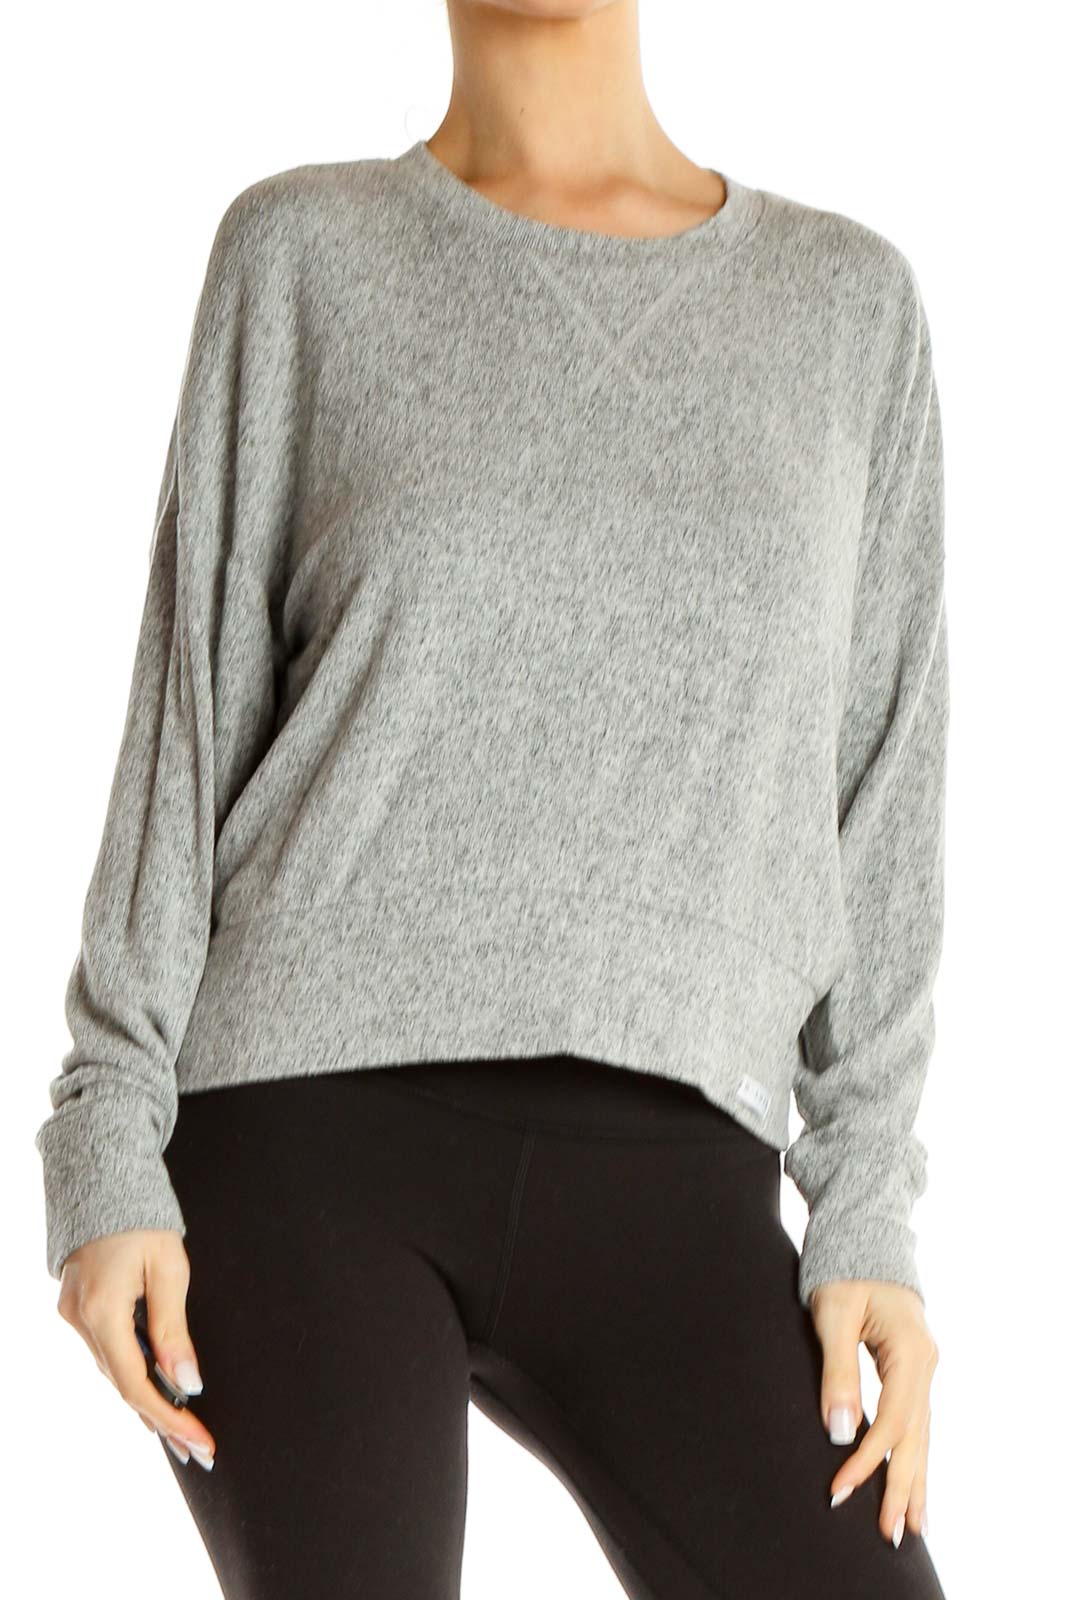 Gray Heather Sweater Front